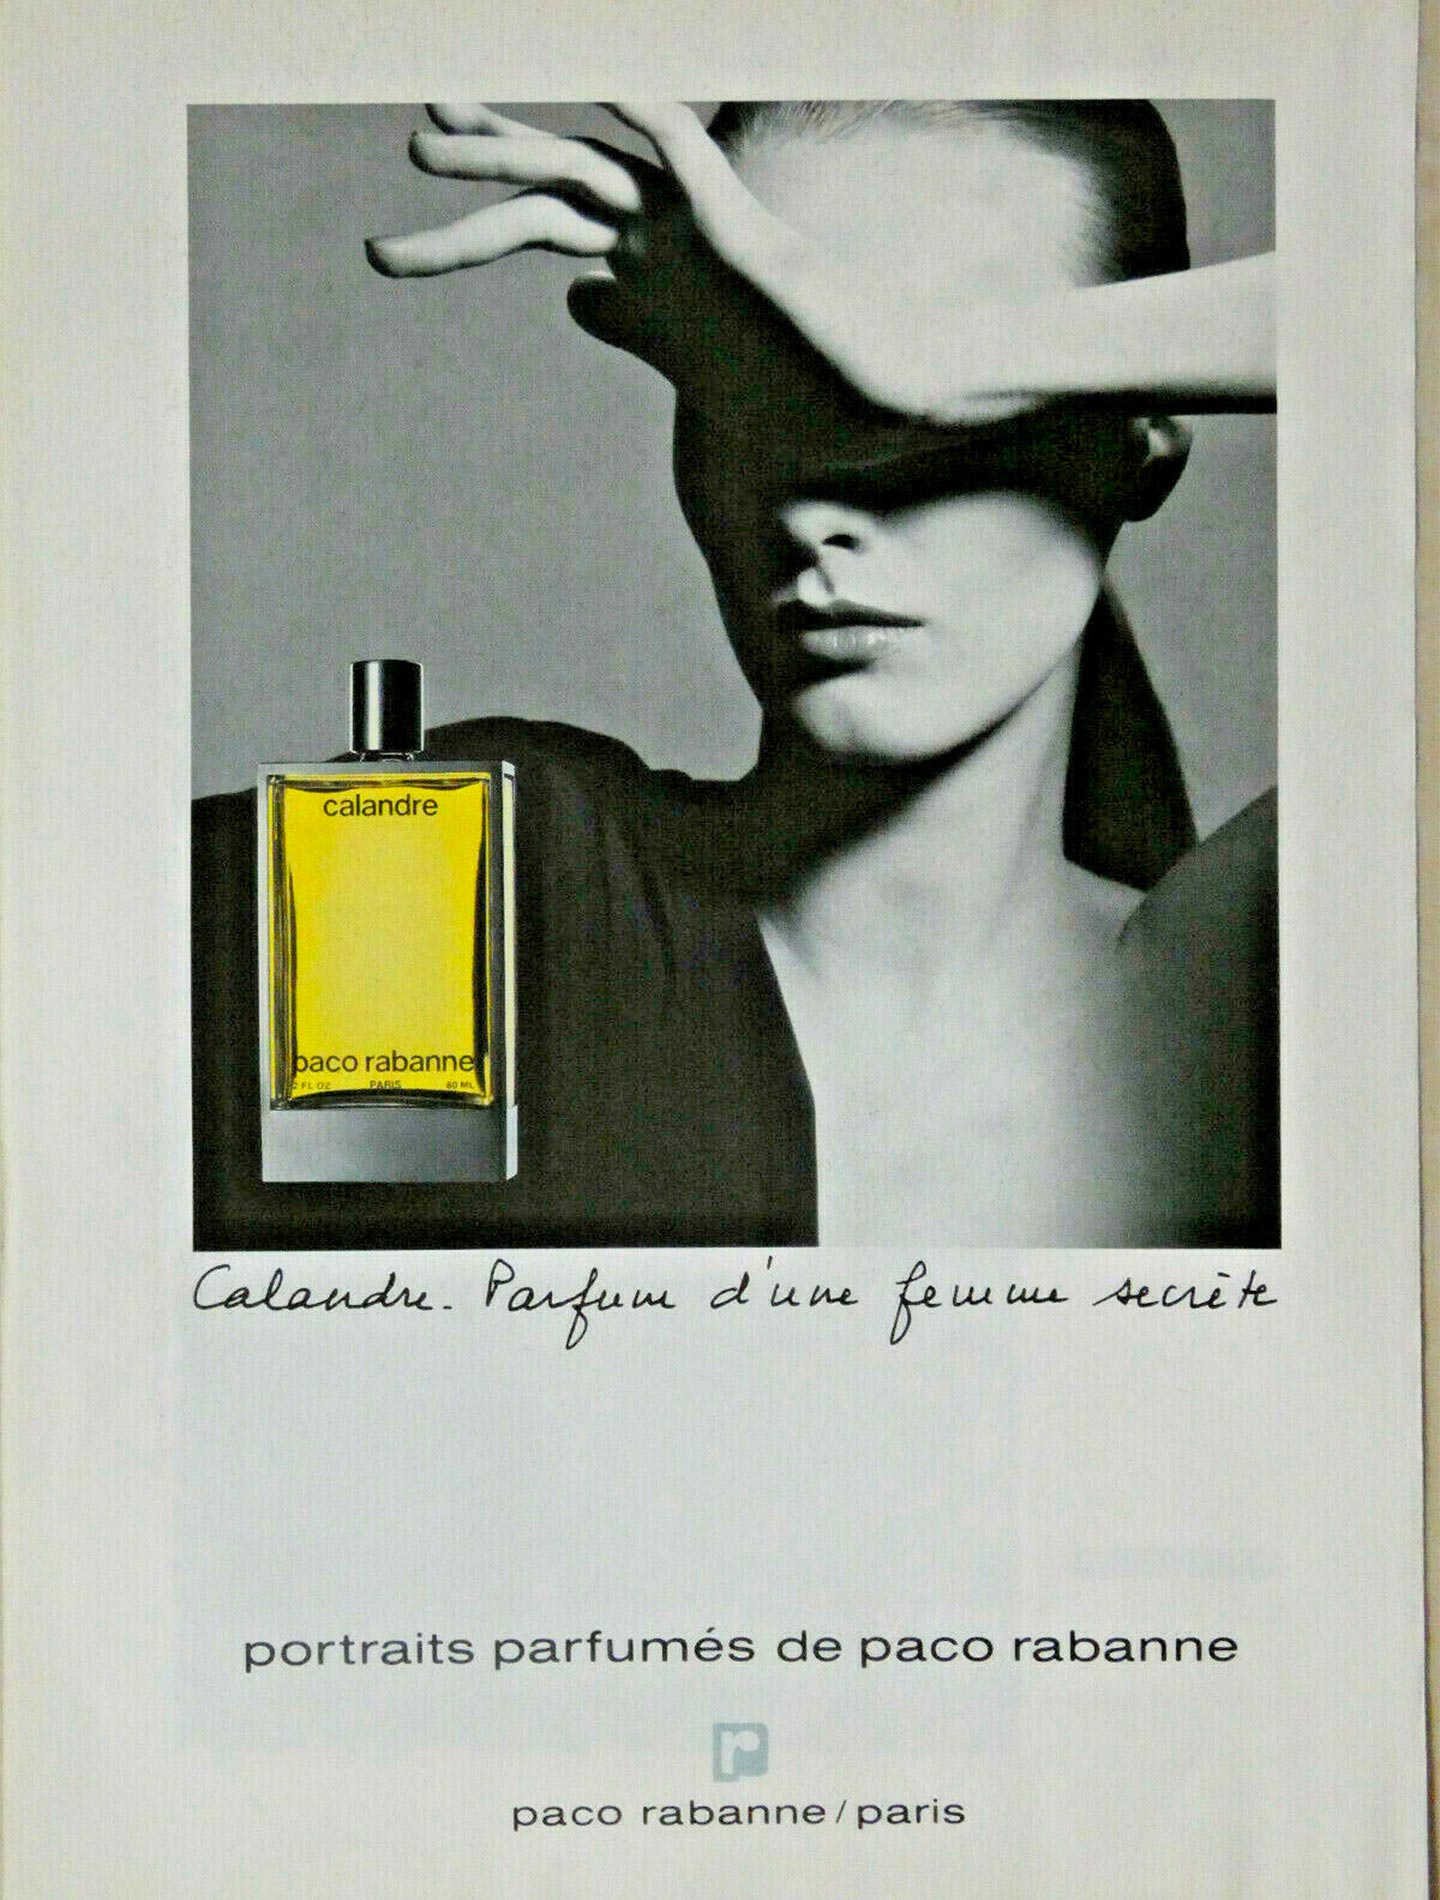 Paco Rabanne imagined a fragrance called Calandre - the word means 'automobile grill' - and turned it into an icon of modern femininity